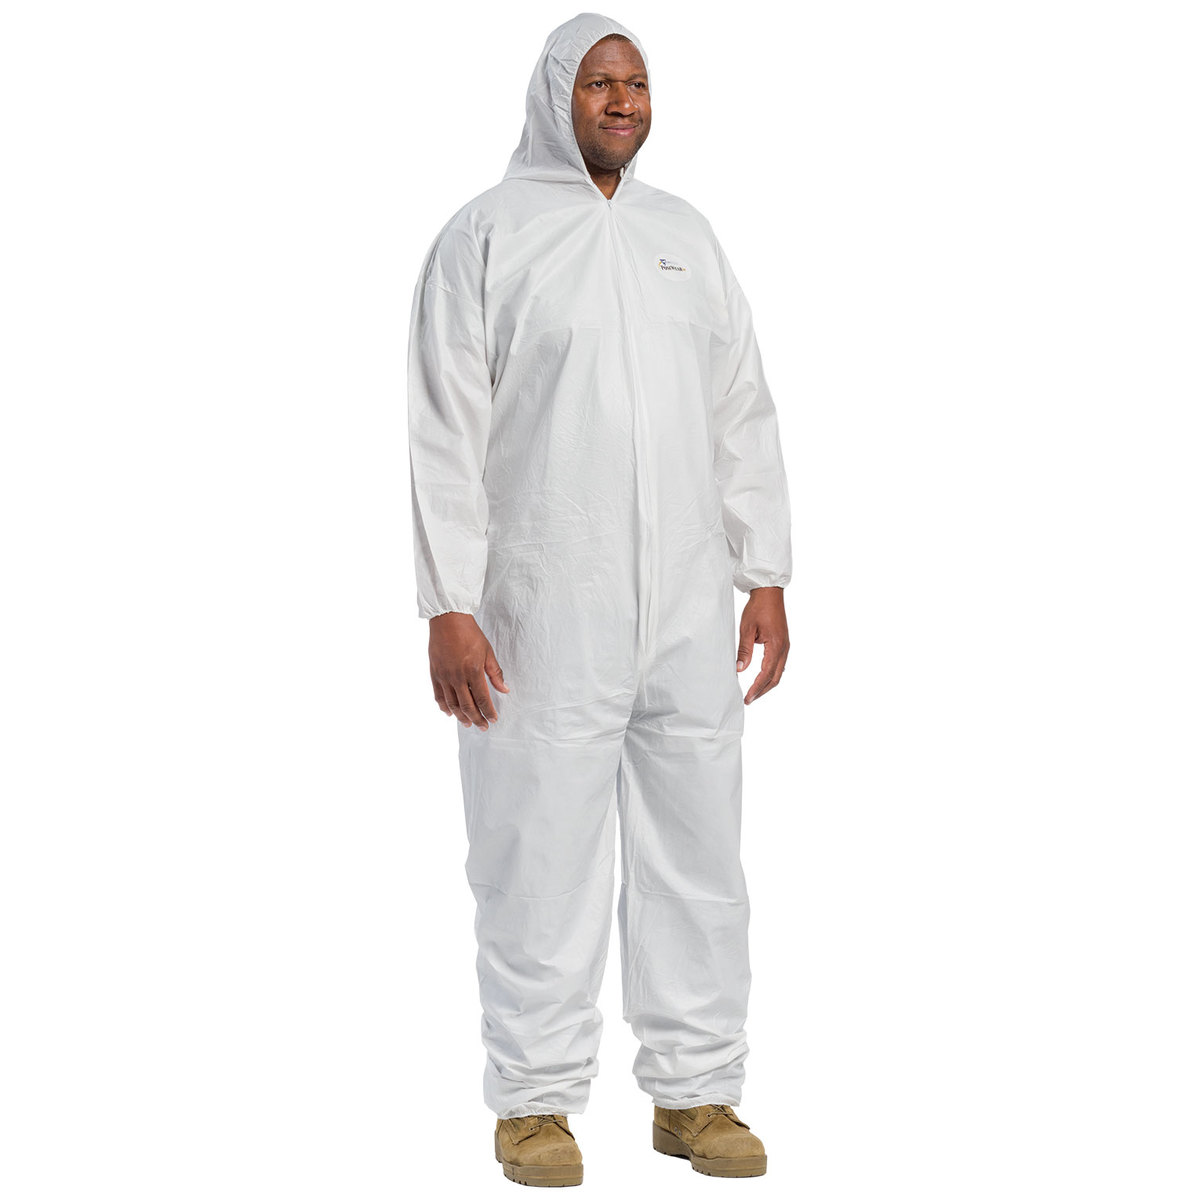 PIP® X-Large White Posi-wear® BA™ Polypropylene Disposable Coveralls (Availability restrictions apply.)